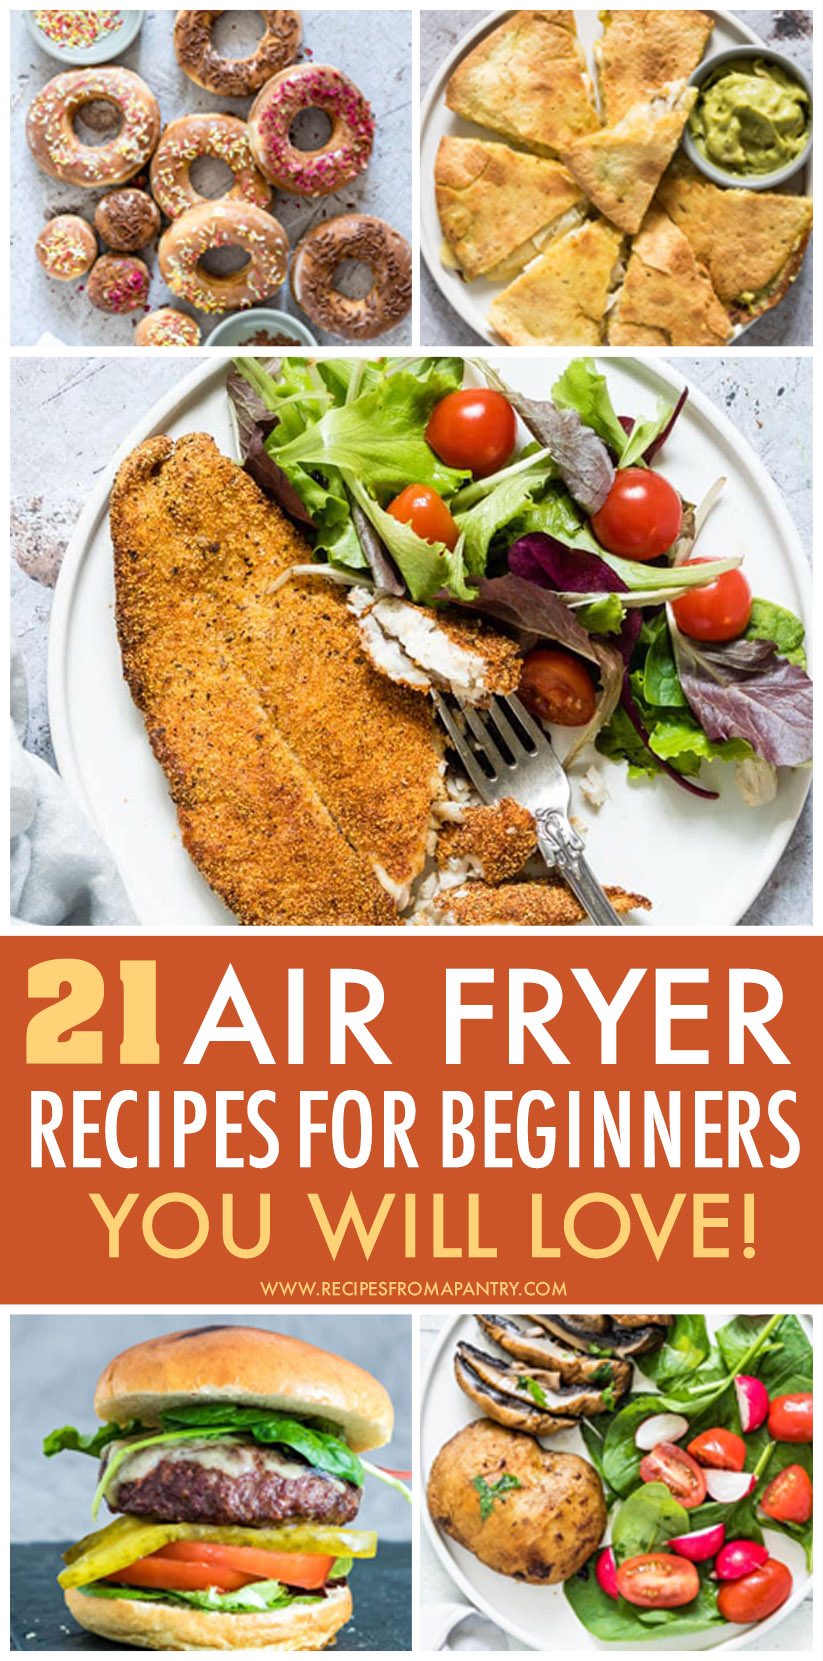 Air Fryer Recipes For Beginners